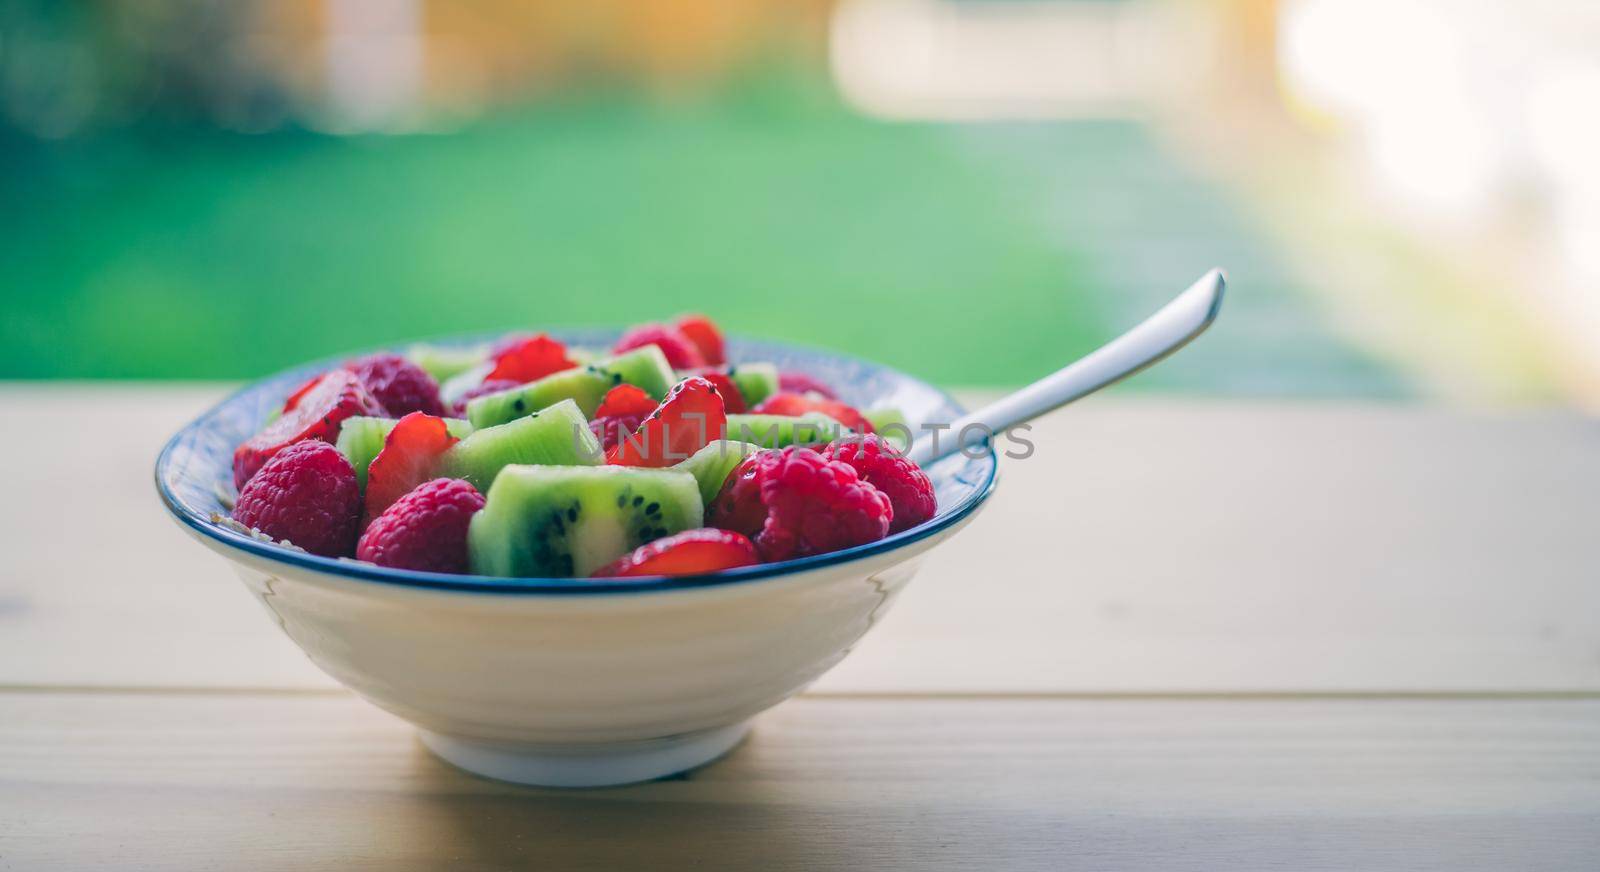 Close up of strawberries and kiwis in a ceramic bowl